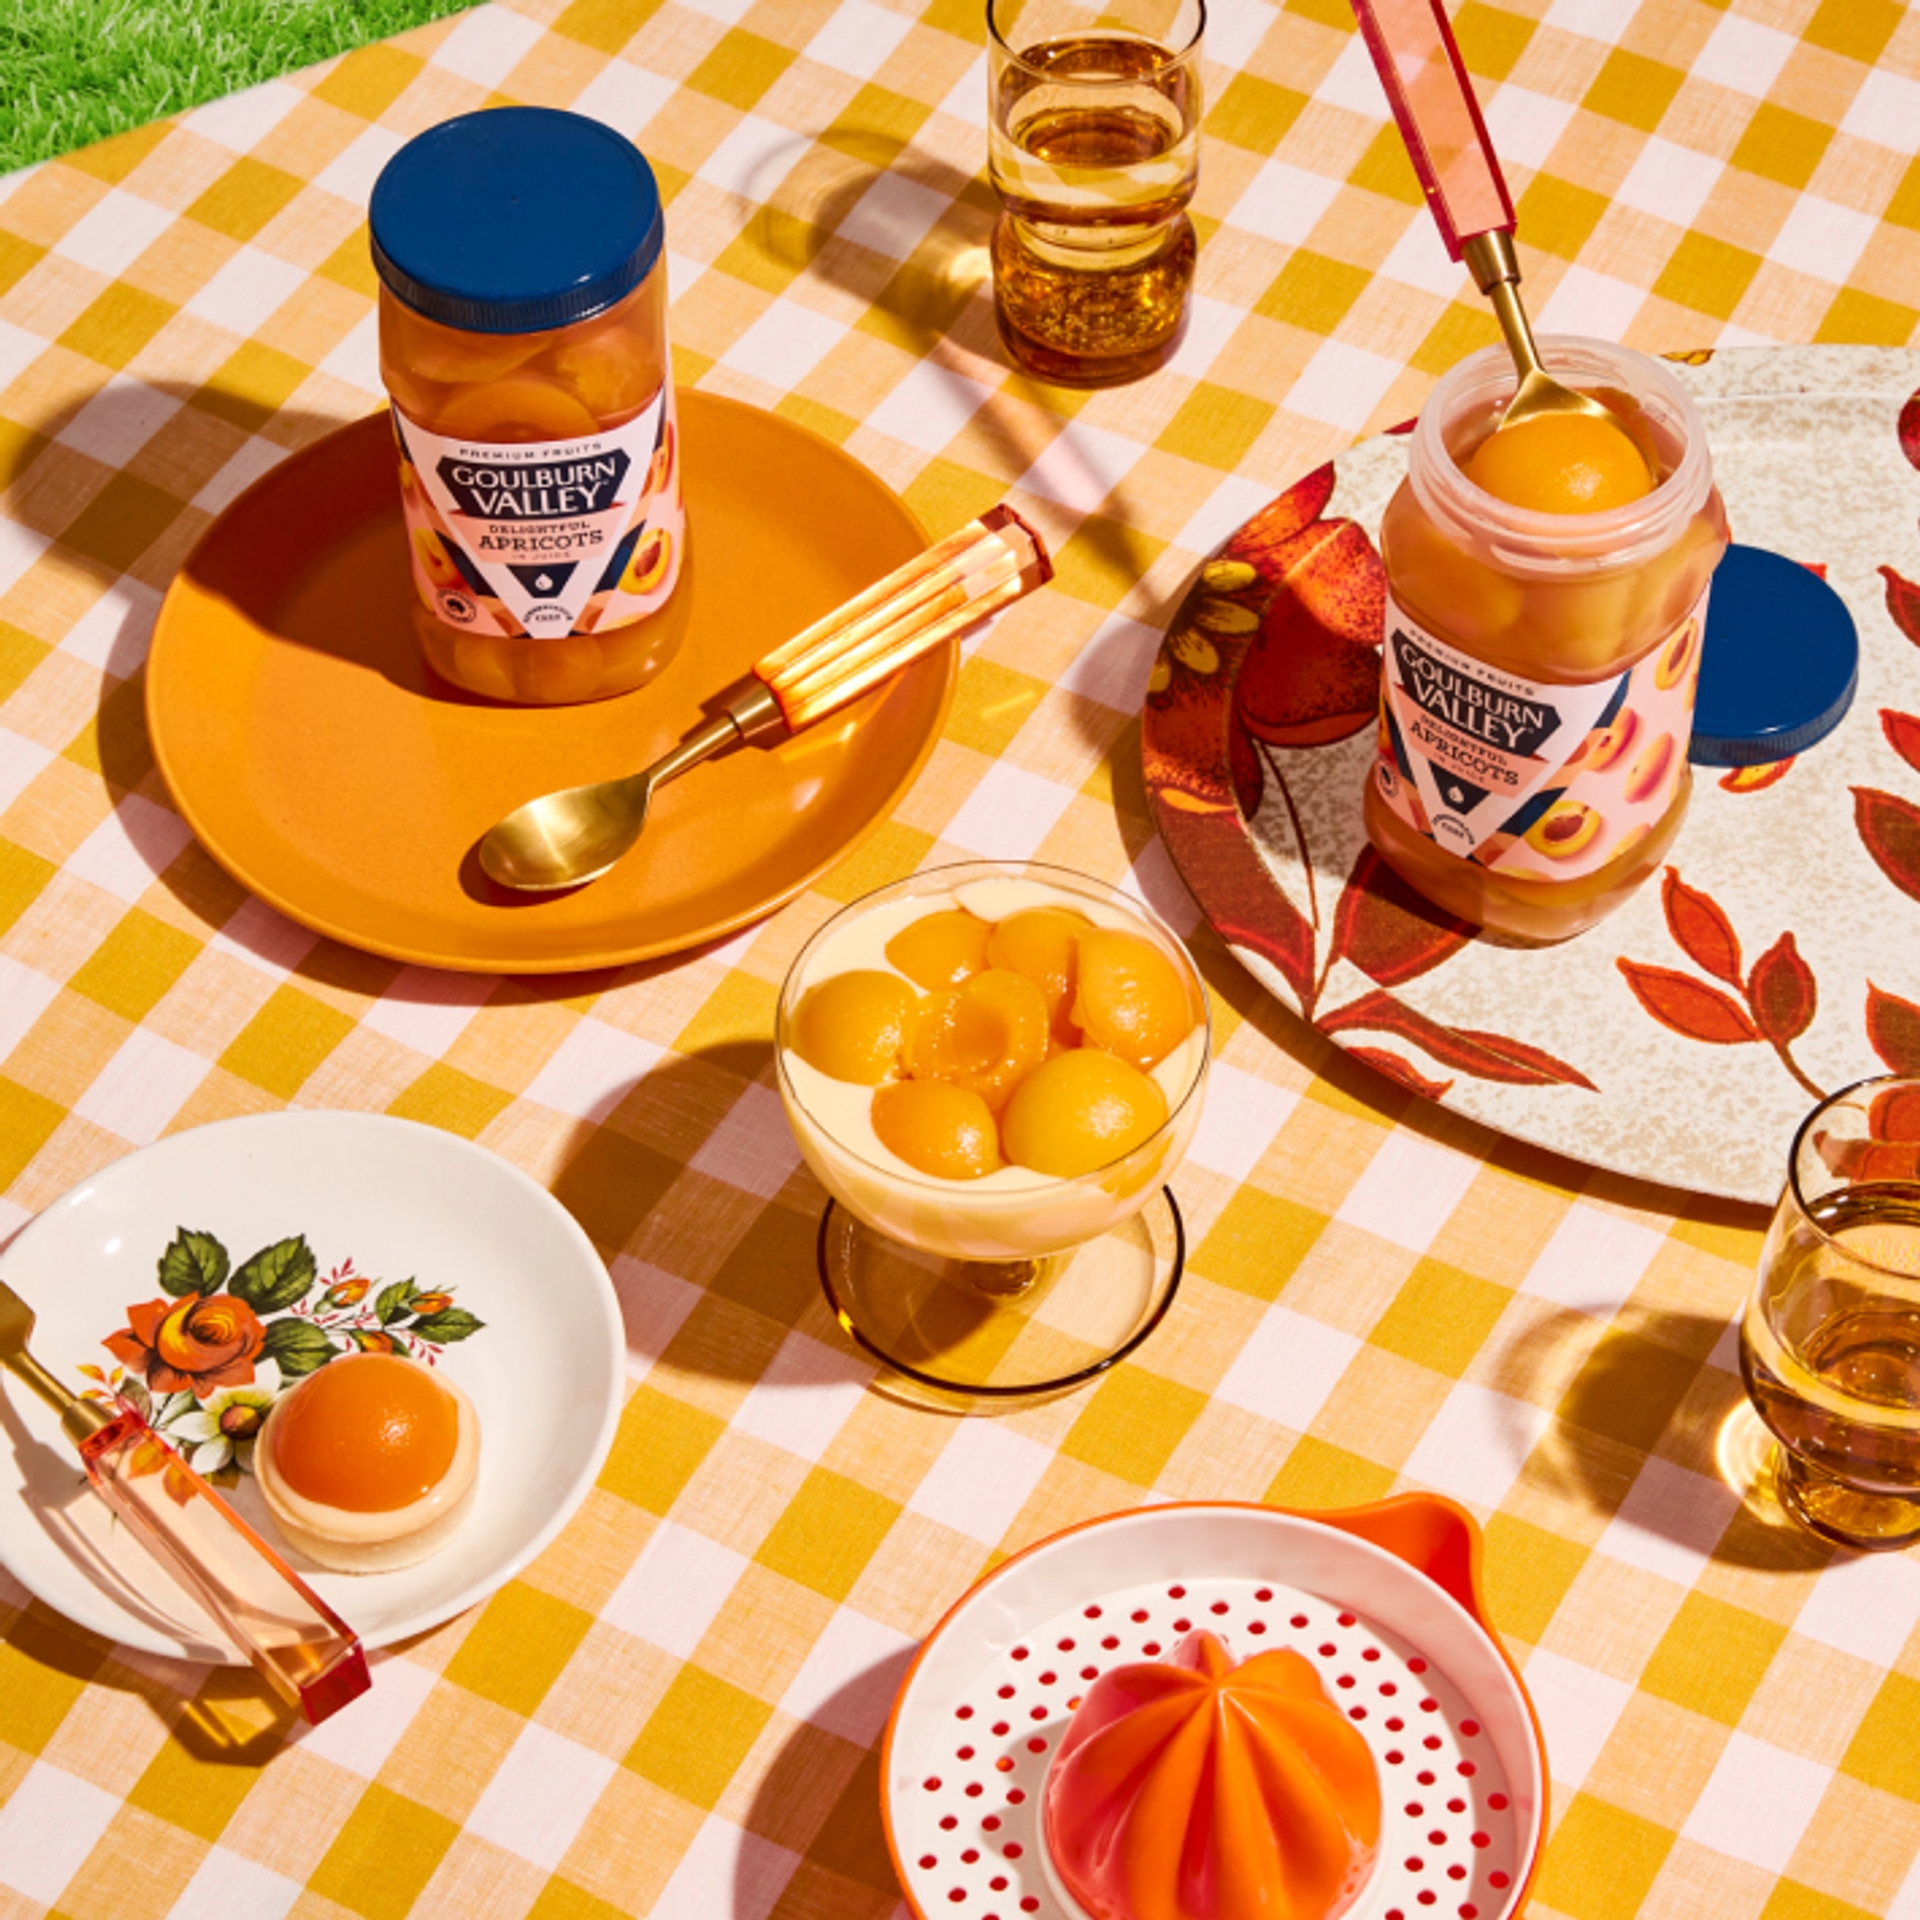 Classic summer picnic table with Goulburn Valley fruit branding design by Our Revolution Creative Director Jen Doran